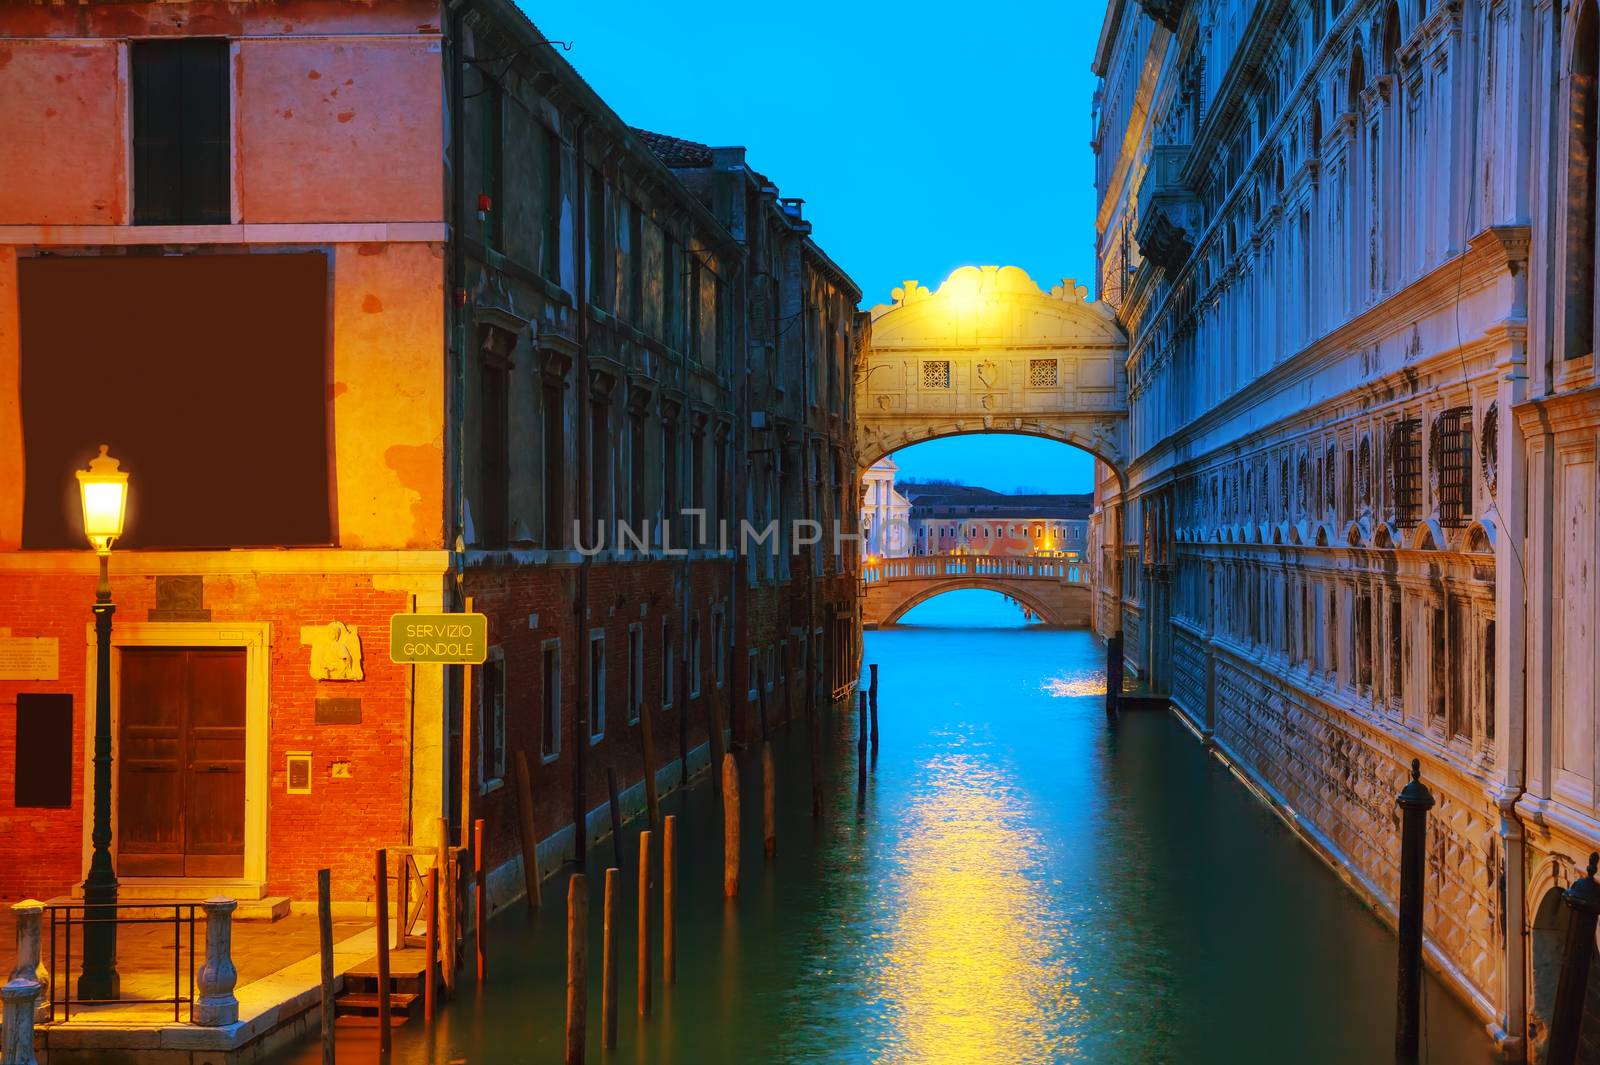 Bridge of sig0hs in Venice, Italy by AndreyKr